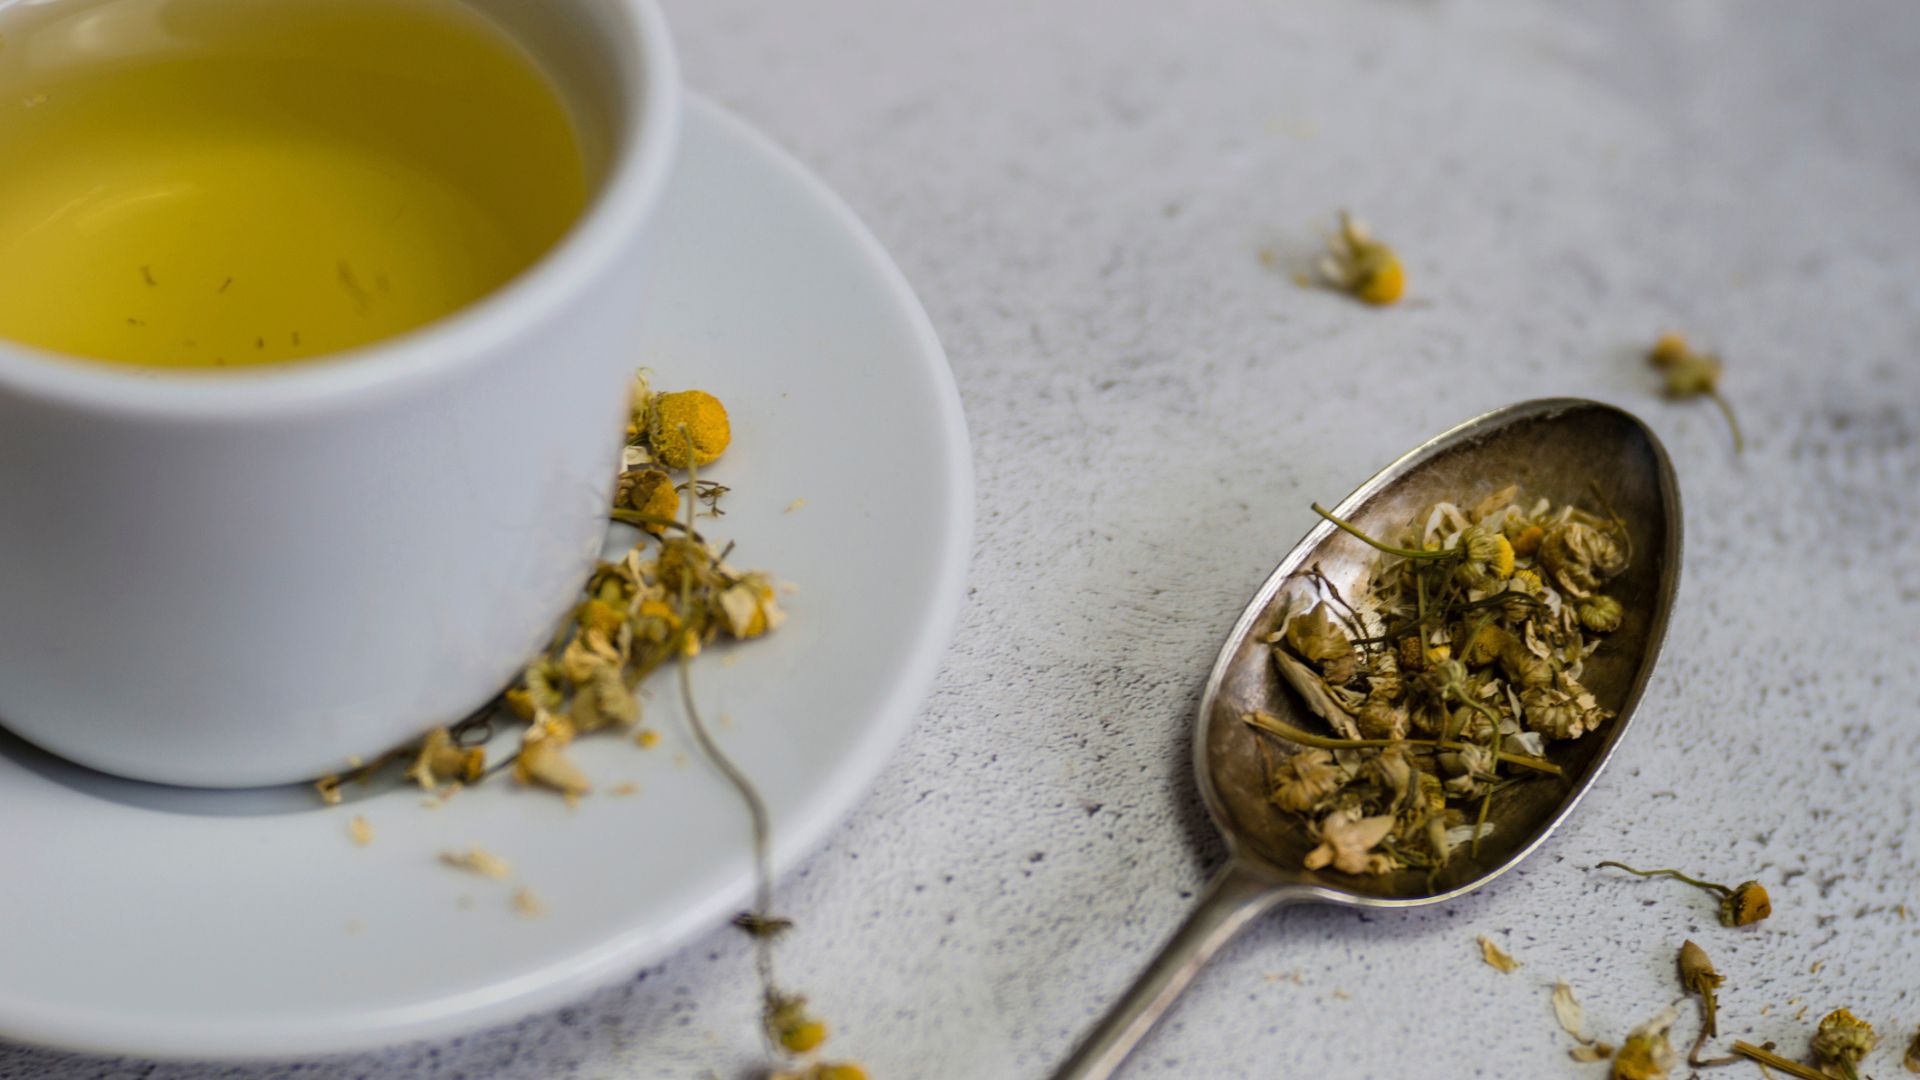 Chamomile seeds sitting on spoon next to cup of tea